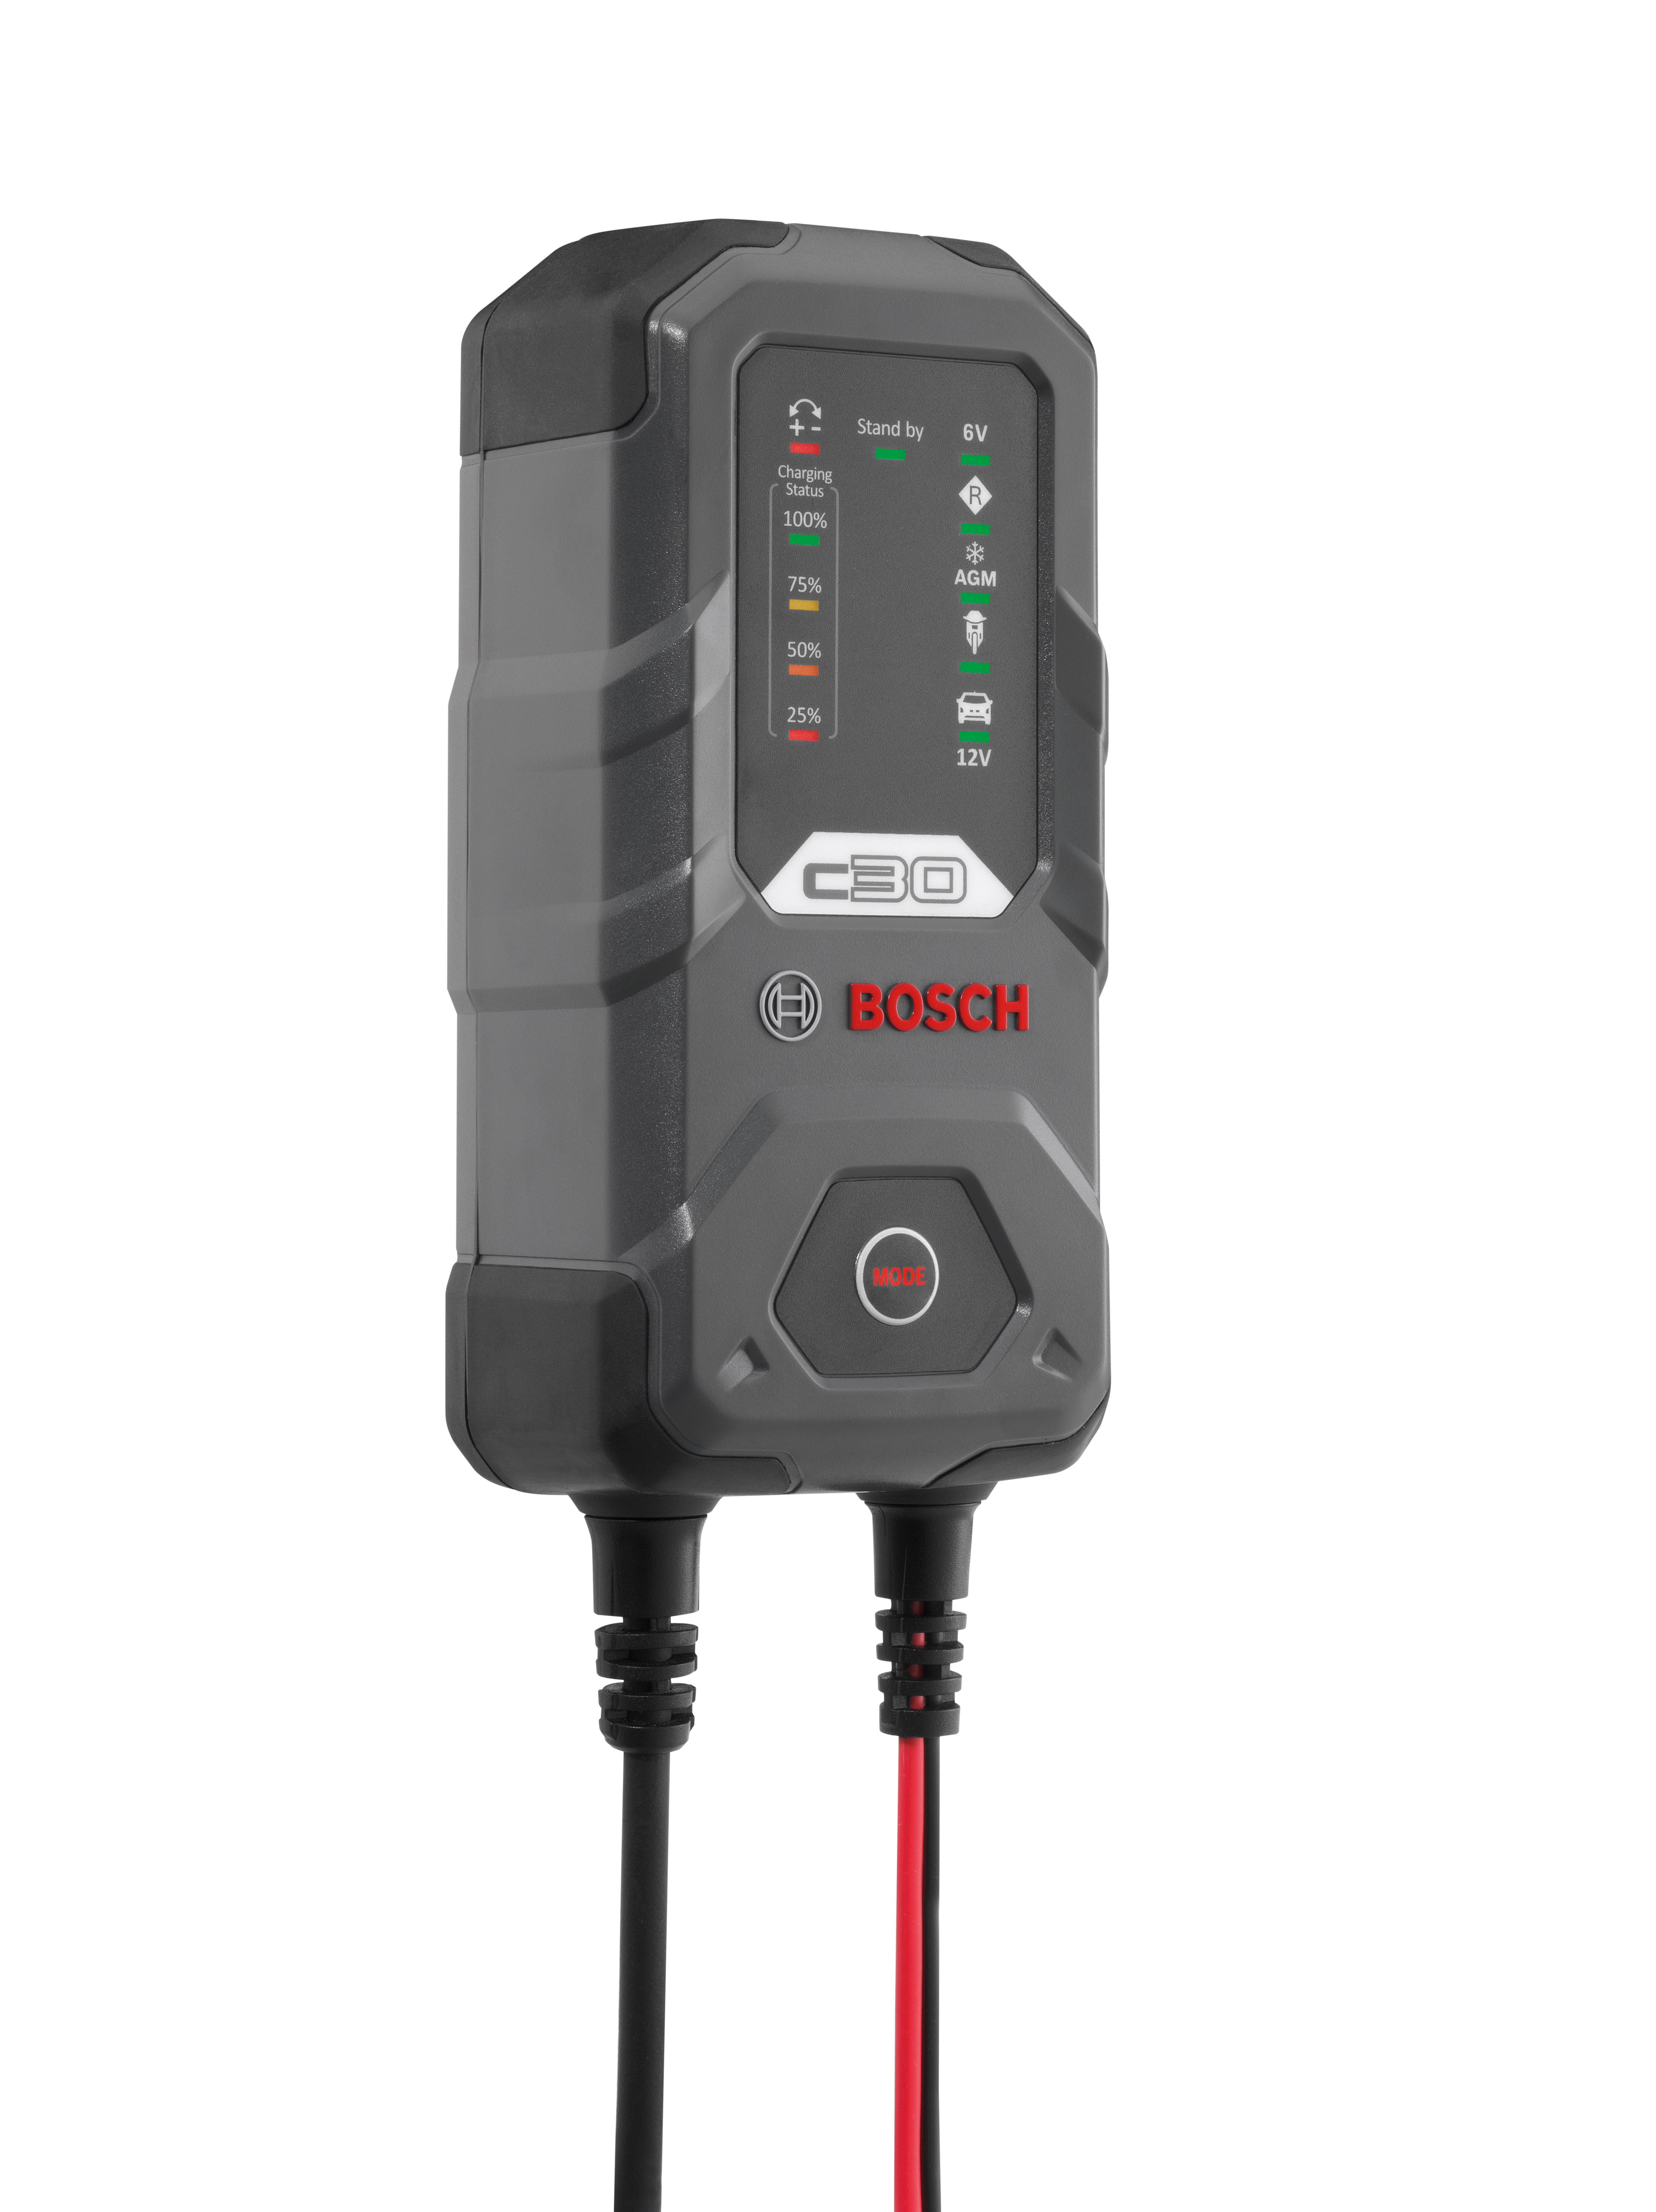 New generation of Bosch battery chargers offers more power and functions -  Bosch Media Service